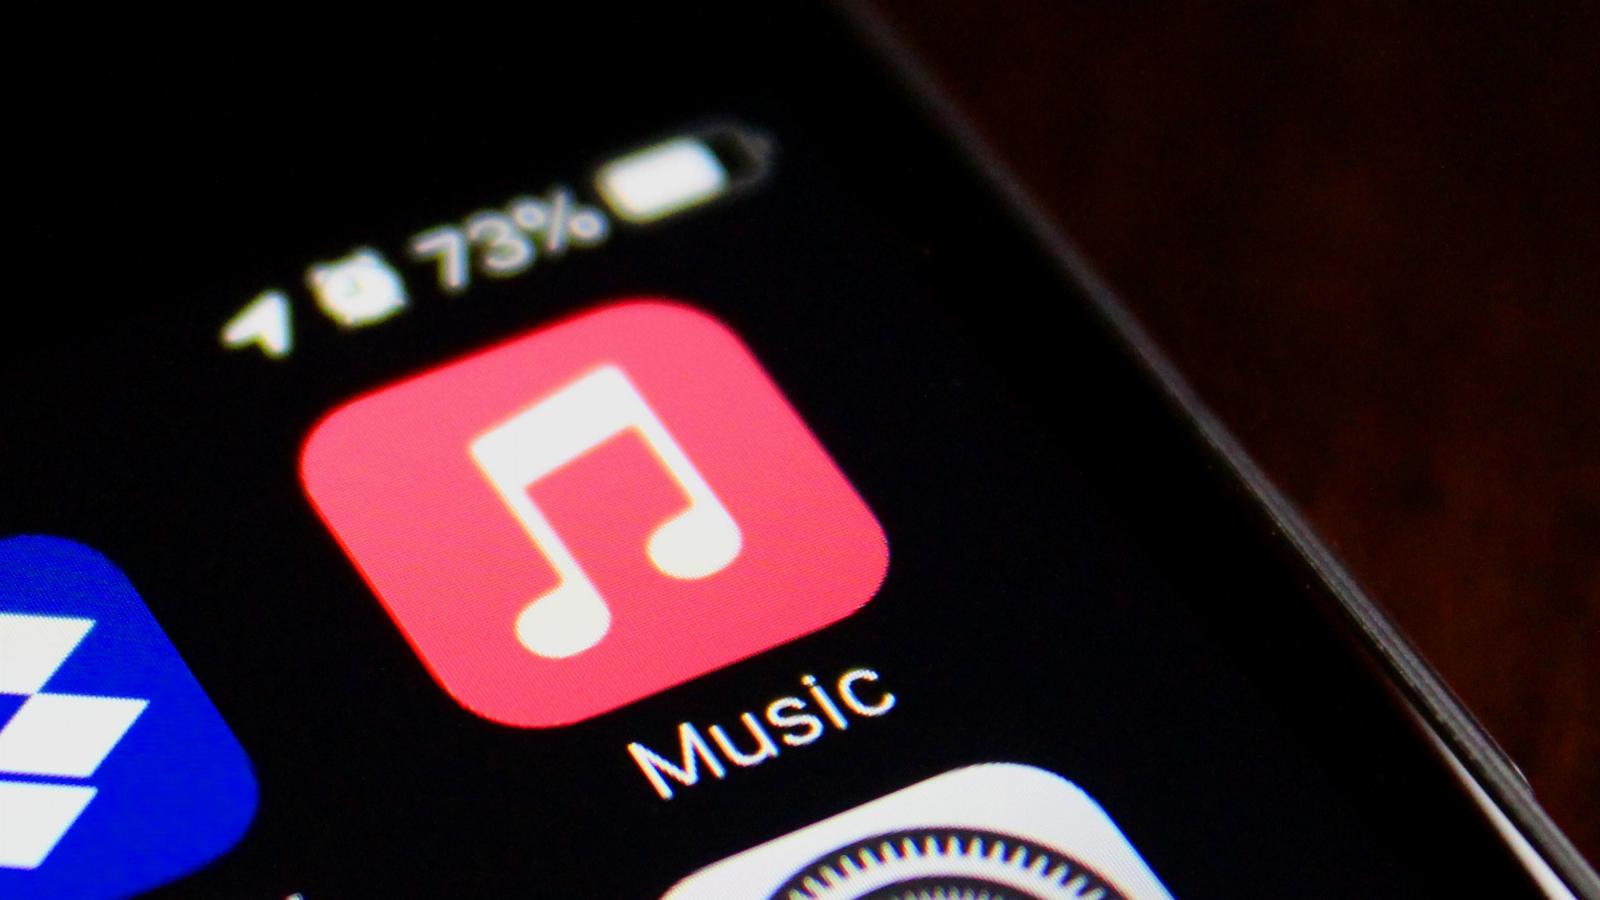 Apple Music adds a new algorithmic station to let users discover new music